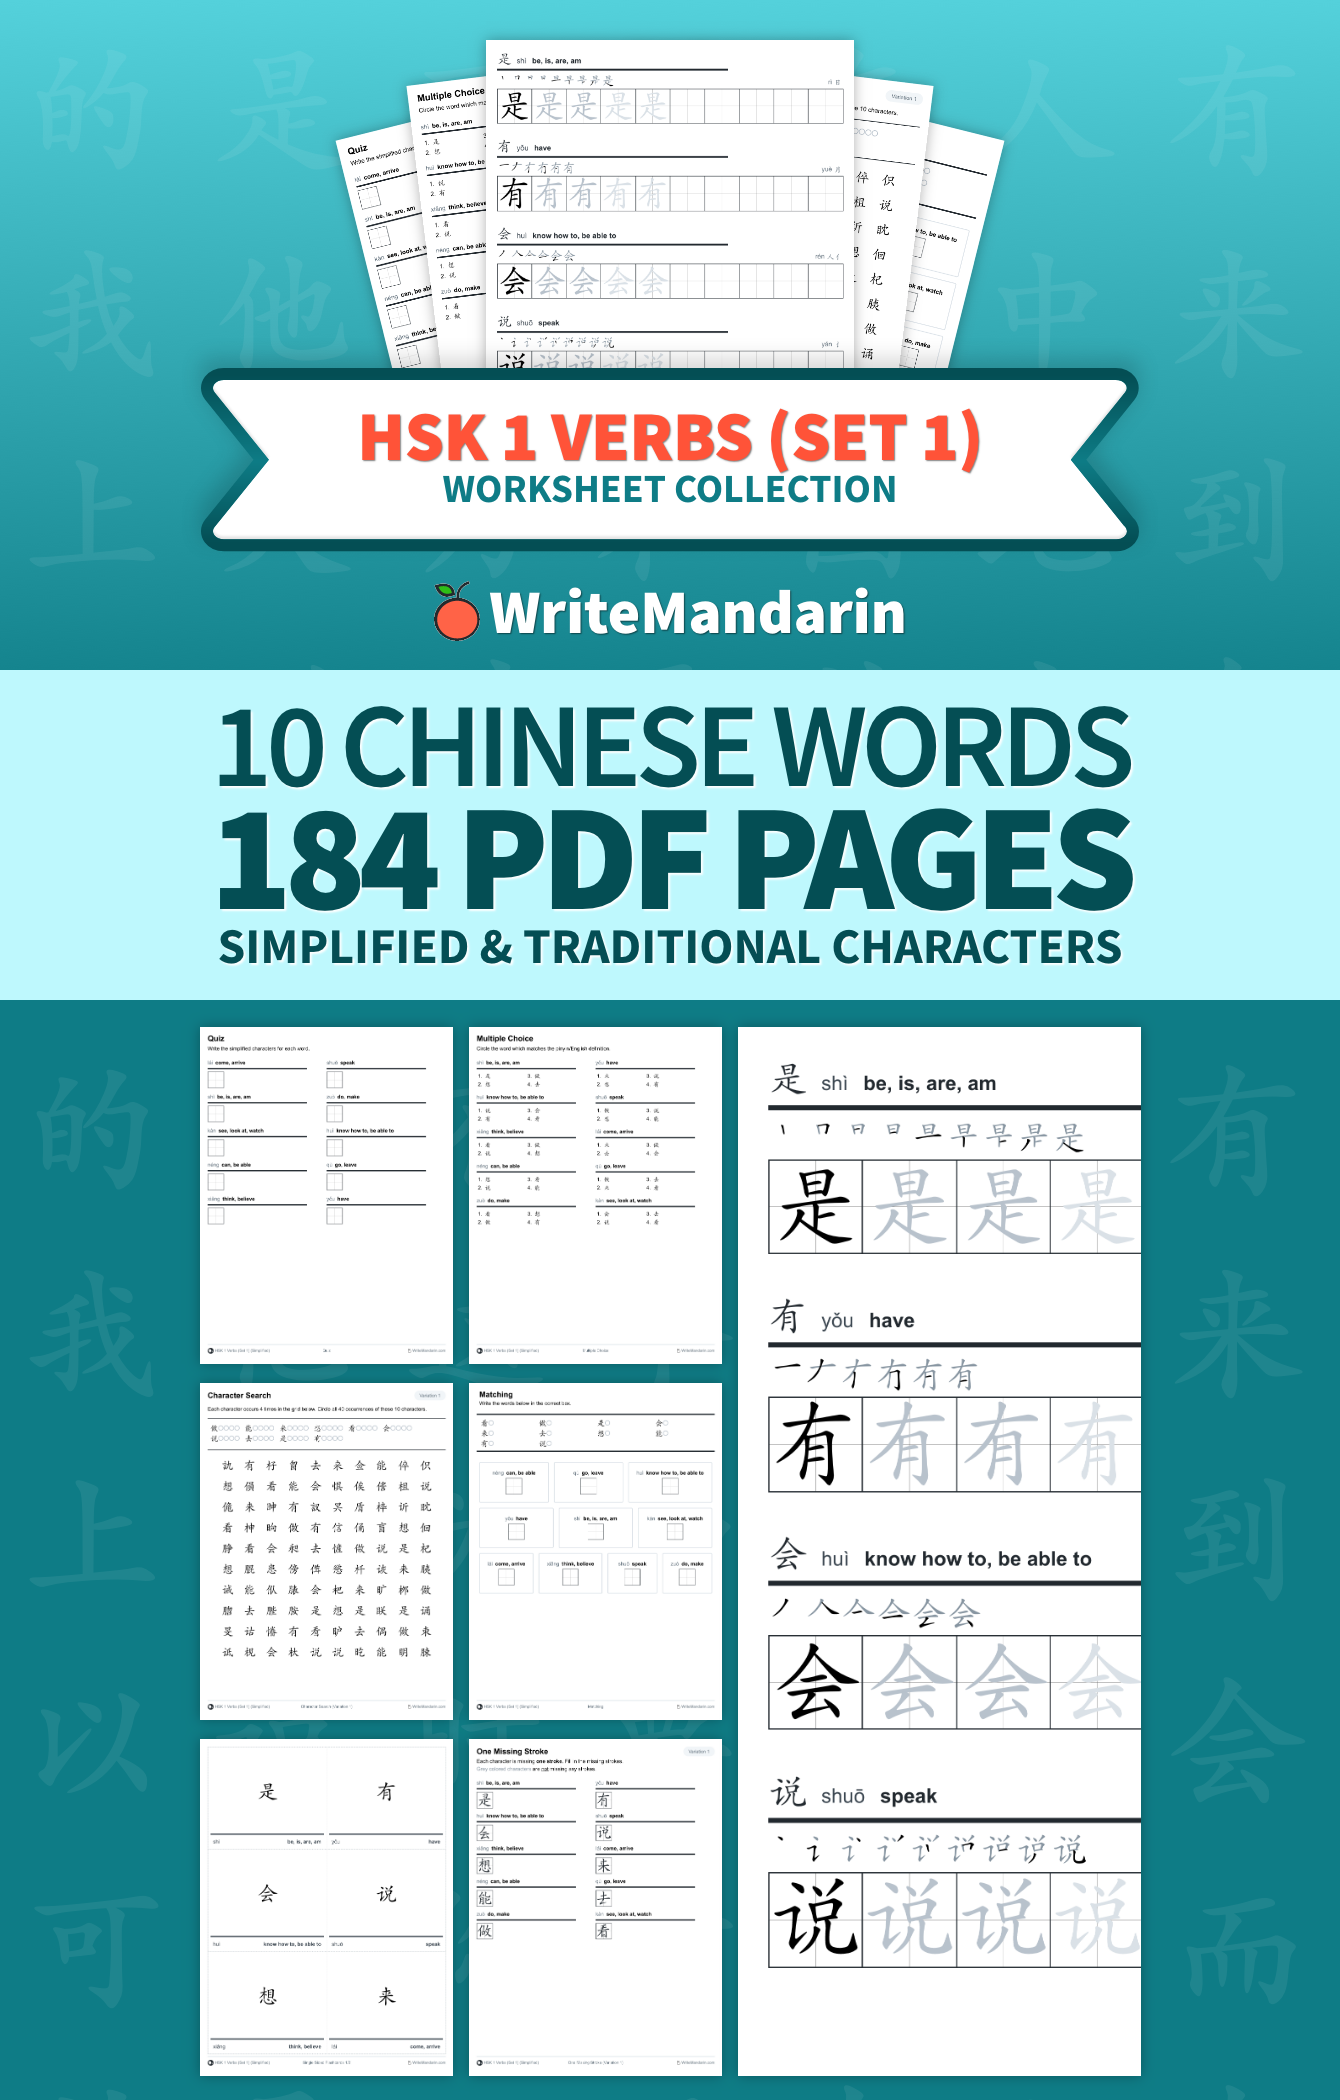 Preview image of HSK 1 Verbs (Set 1) worksheet collection